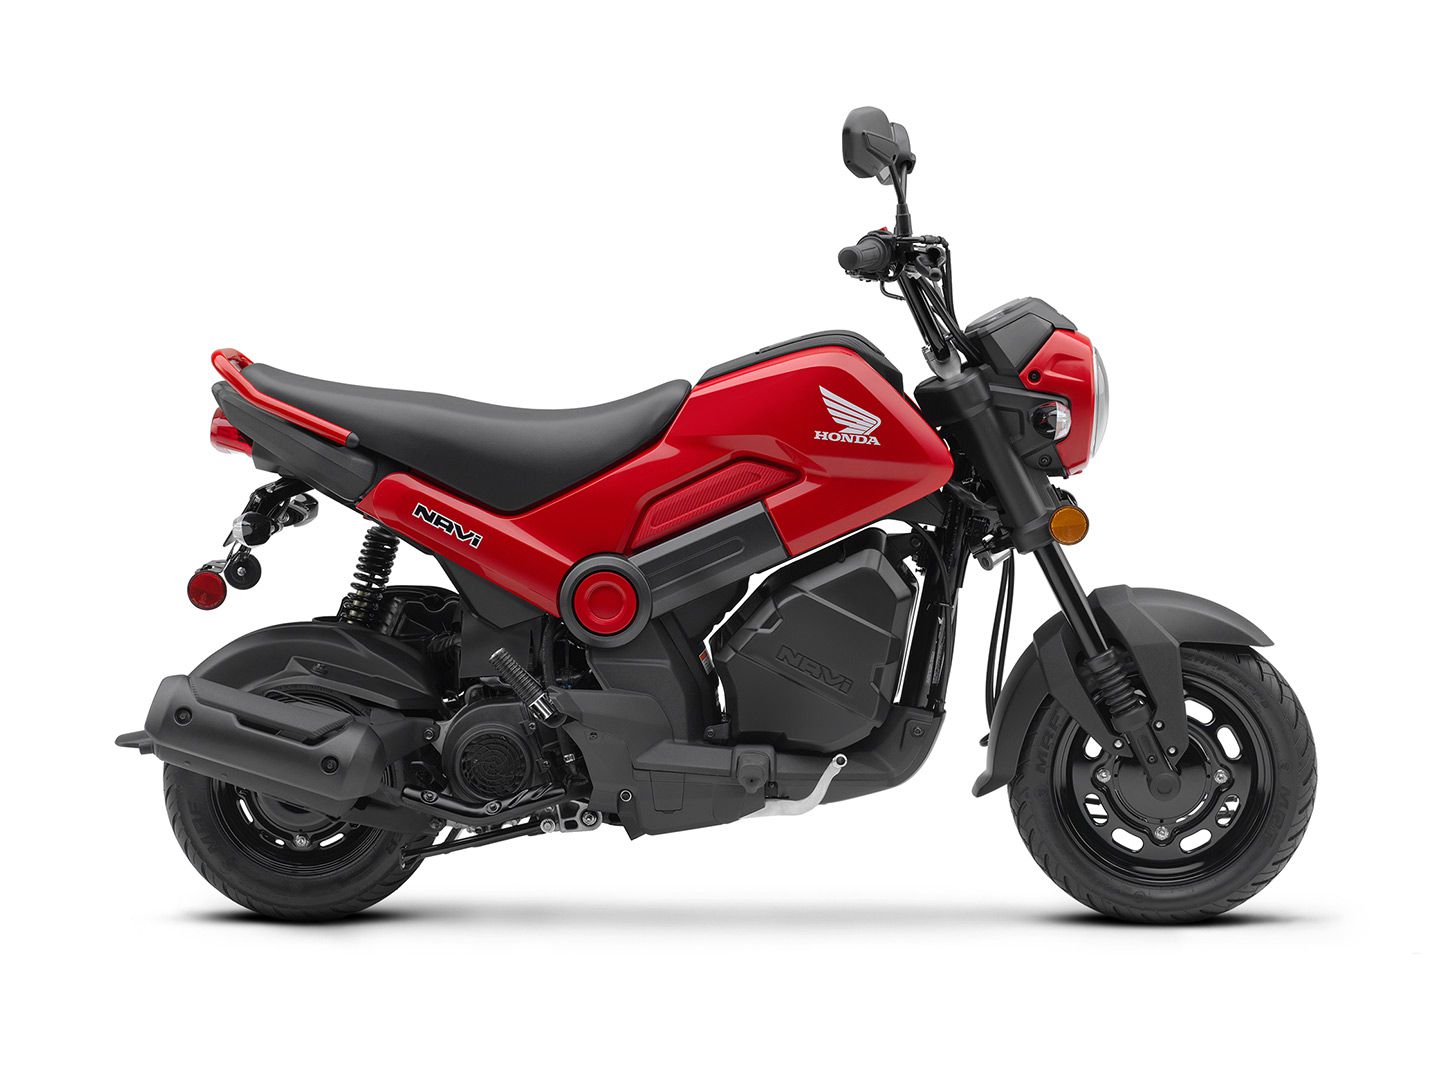 The 2023 Honda Navi is part motorcycle, part scooter. Looks are very Grom-like, but engine location and usability is very much like a scooter. In fact, the powerplant comes from the Honda Activa, a scooter that is popular in Asia.